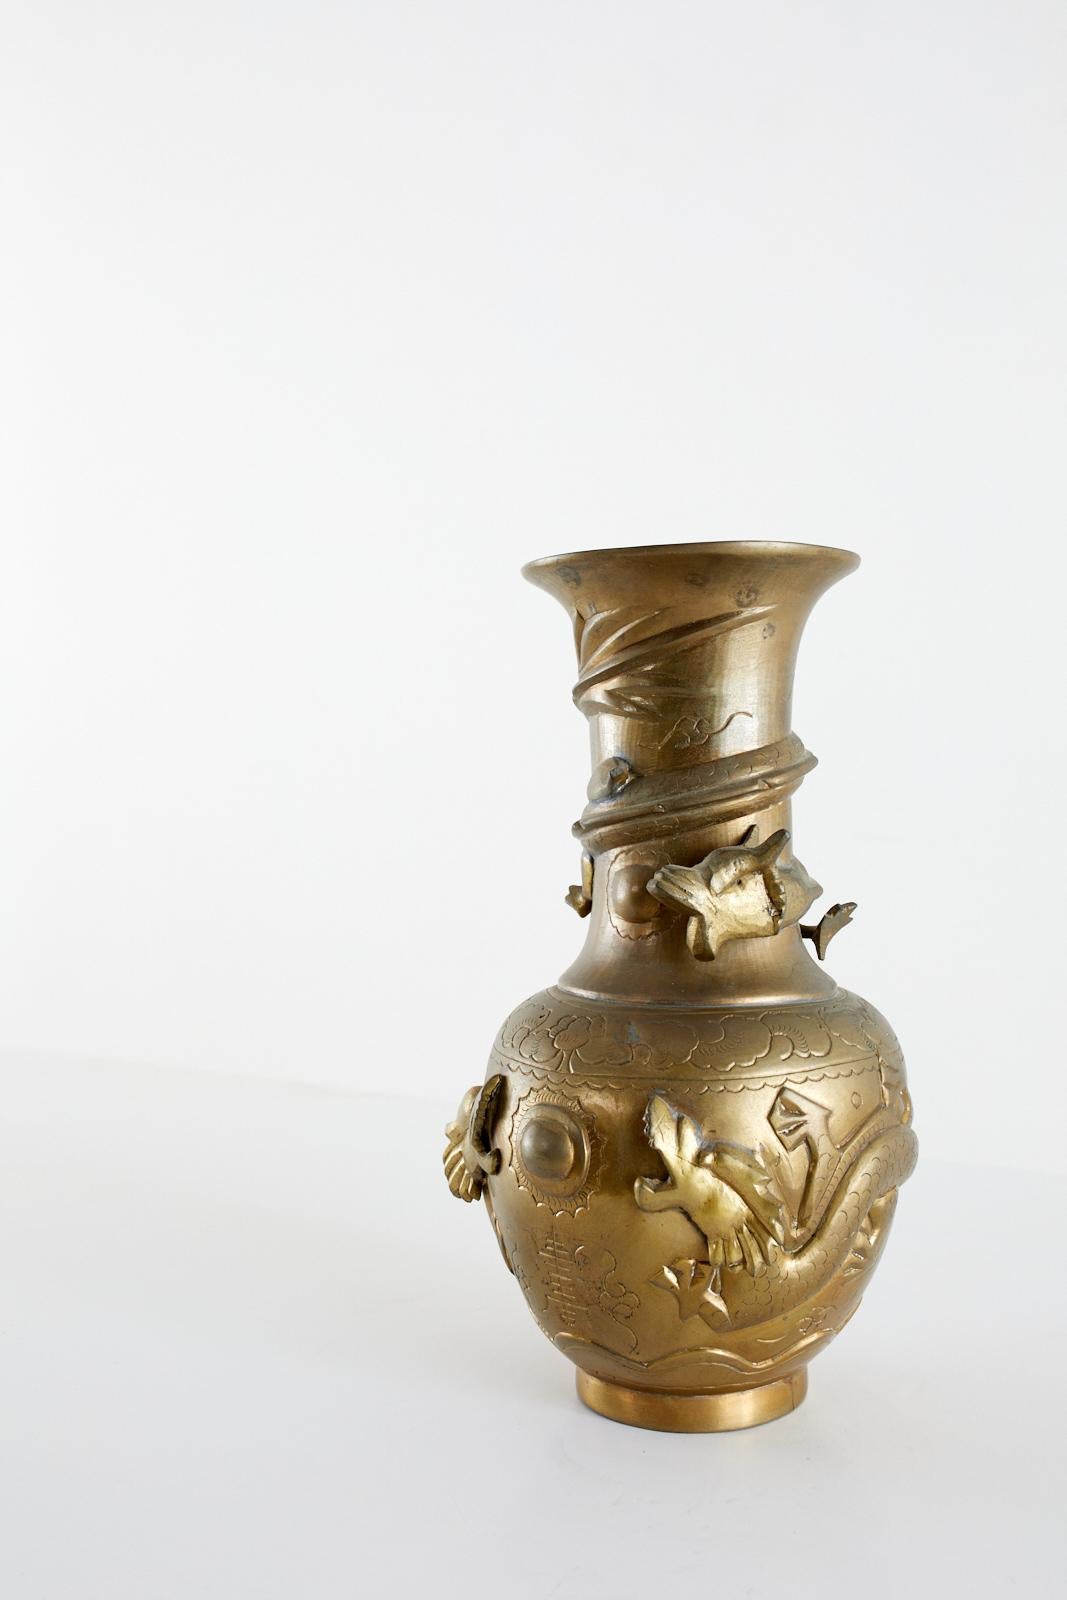 Patinated brass Chinese export vase featuring a high relief design of three dragons. Two dragons are depicted on the body chasing an orb or pearl sun design, and one dragon is on the neck. Maker's mark on bottom.